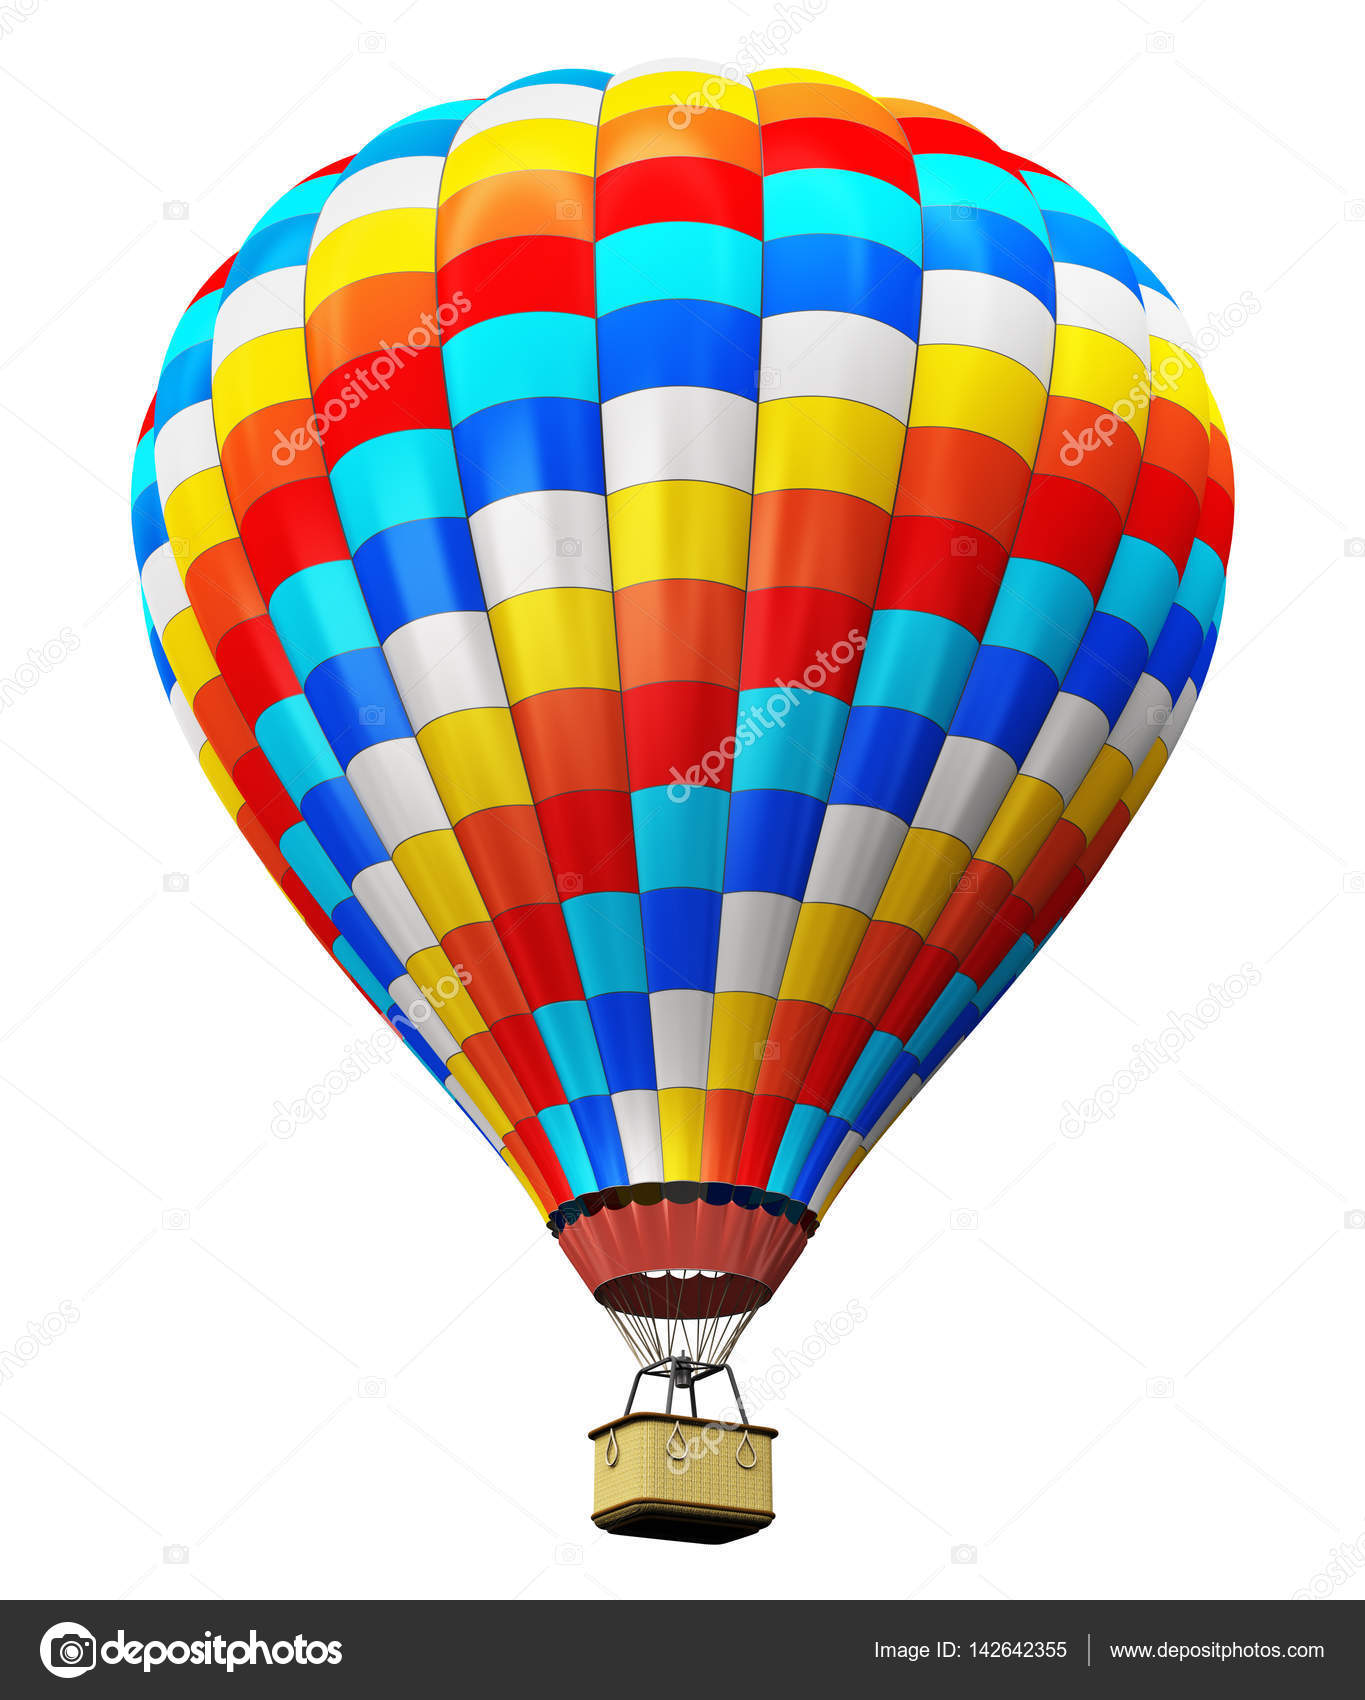 Color hot air balloon isolated on white background Stock Photo by ©scanrail  142642355